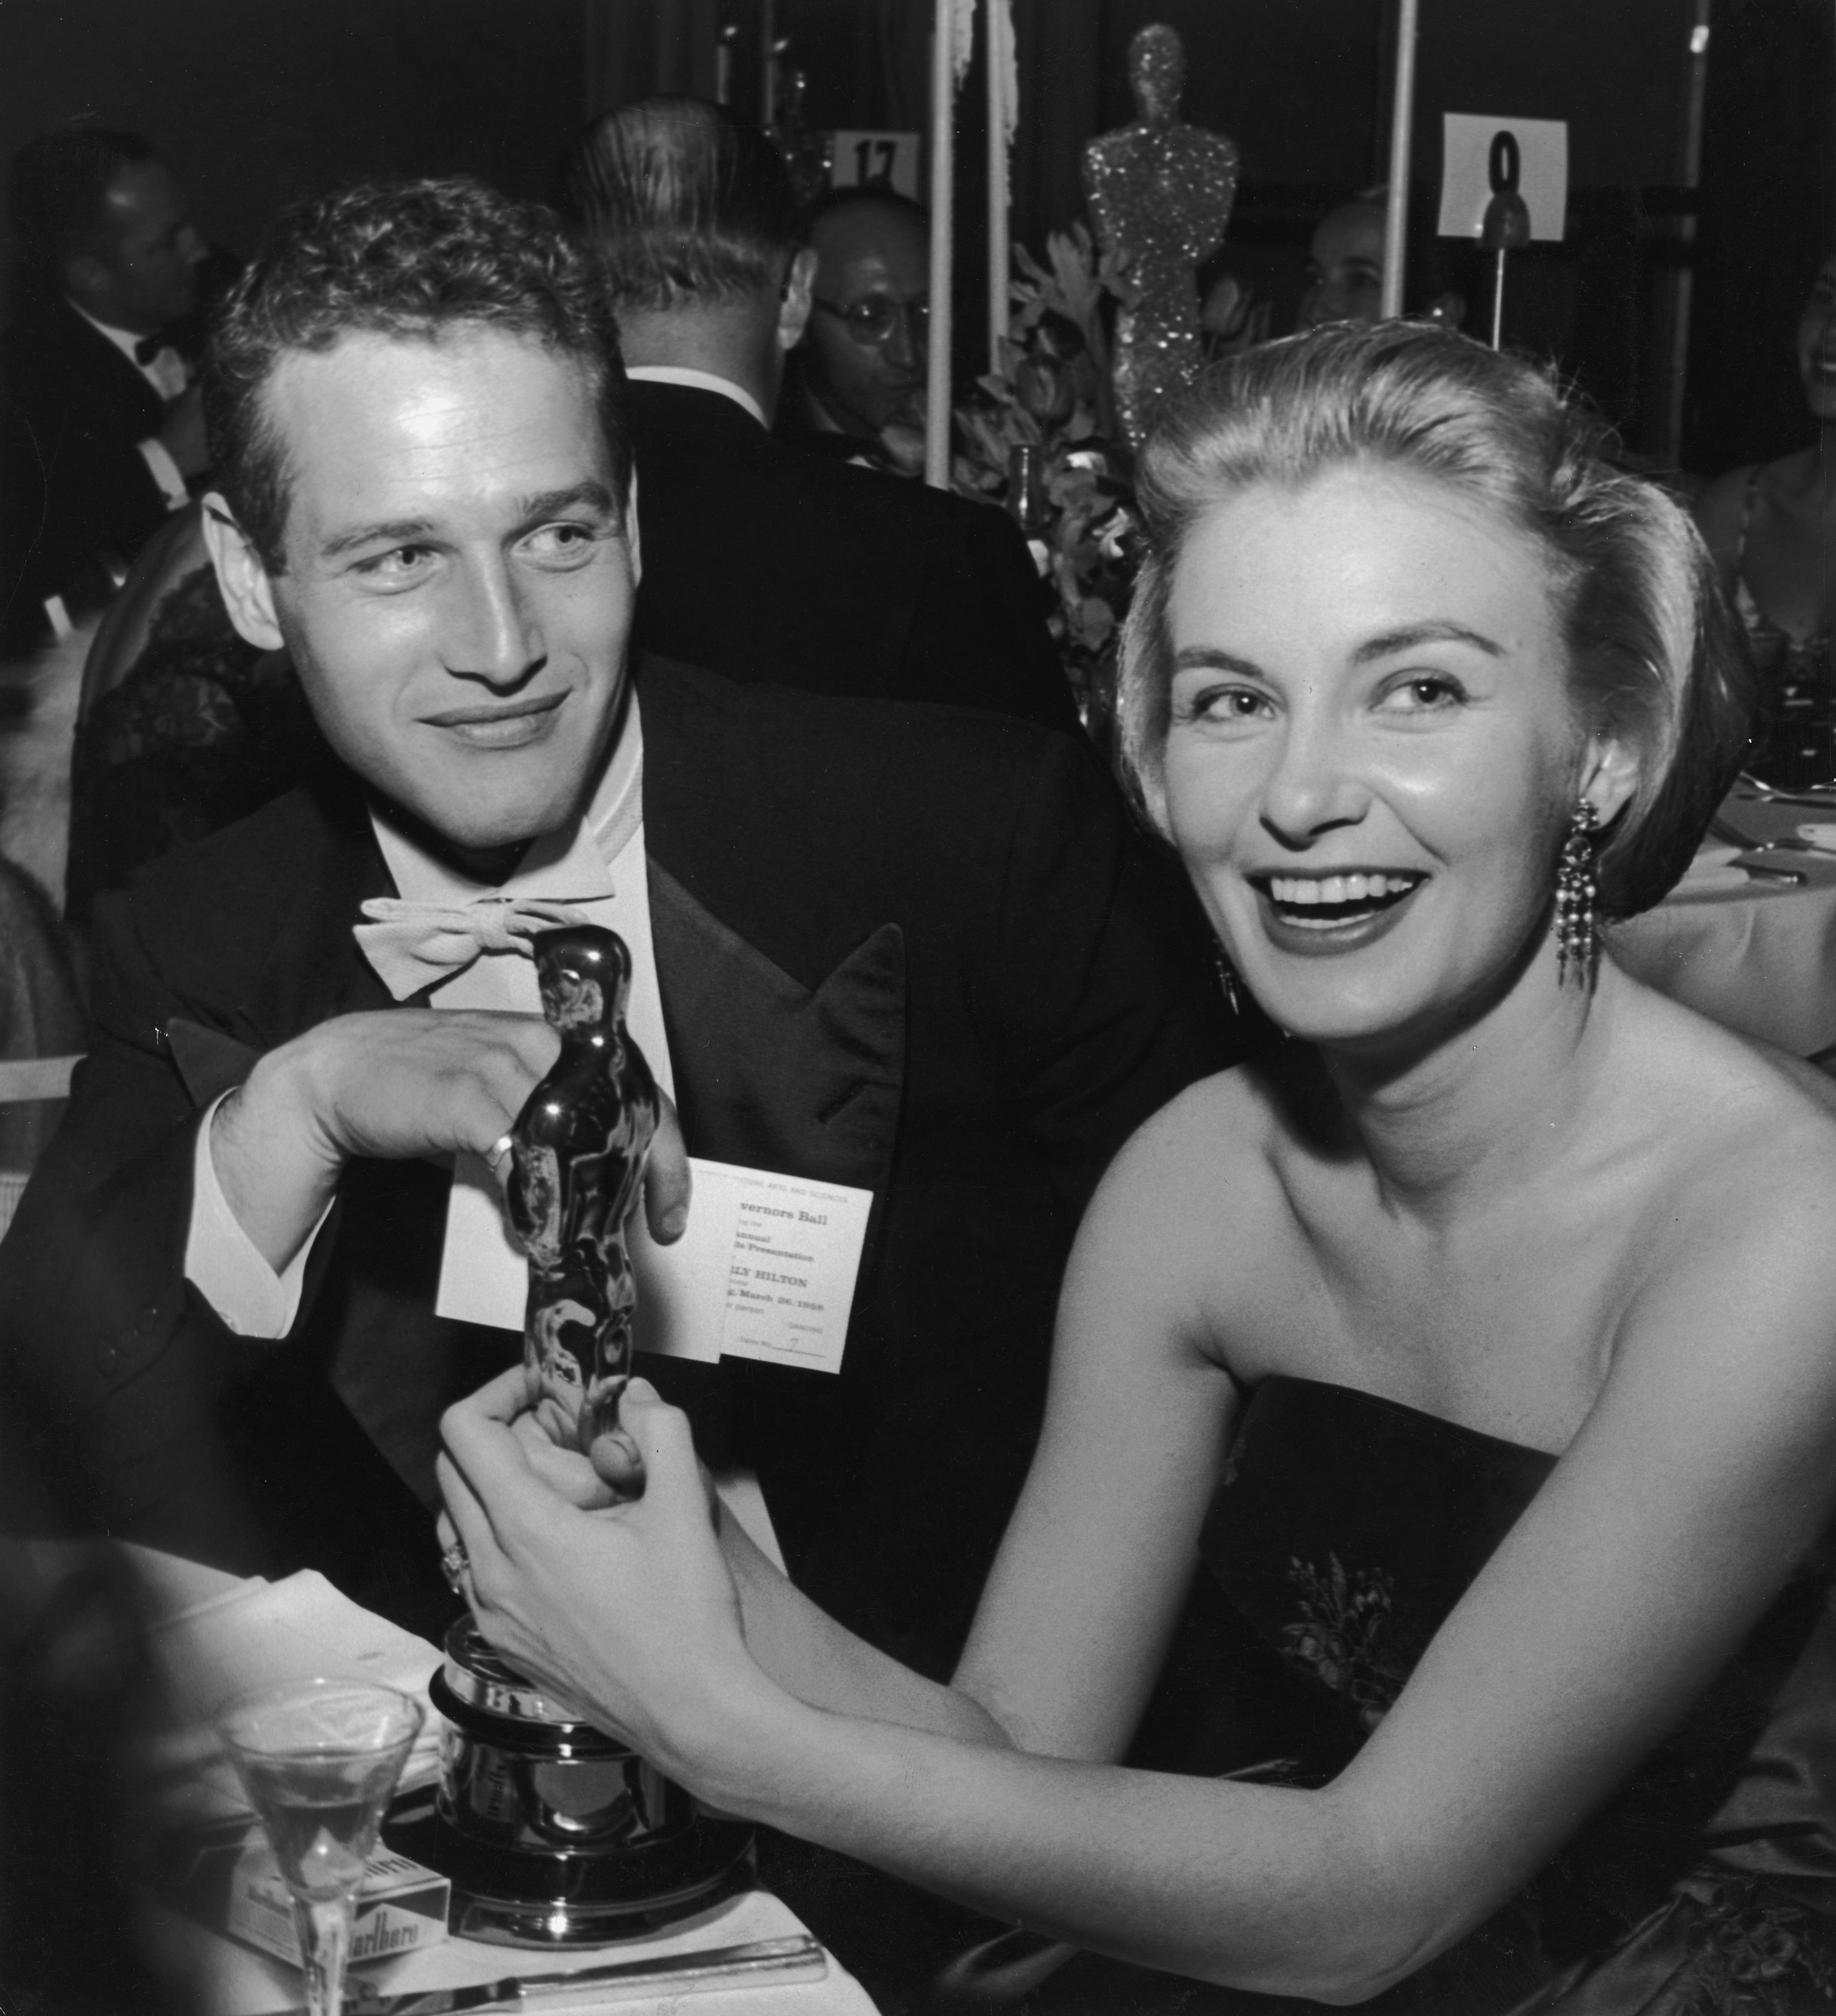 Paul Newman and Joanne Woodward with her Oscar statuette during the Governor's Ball, an Academy Awards party in Beverly Hills, California, in 1958. | Source: Getty Images